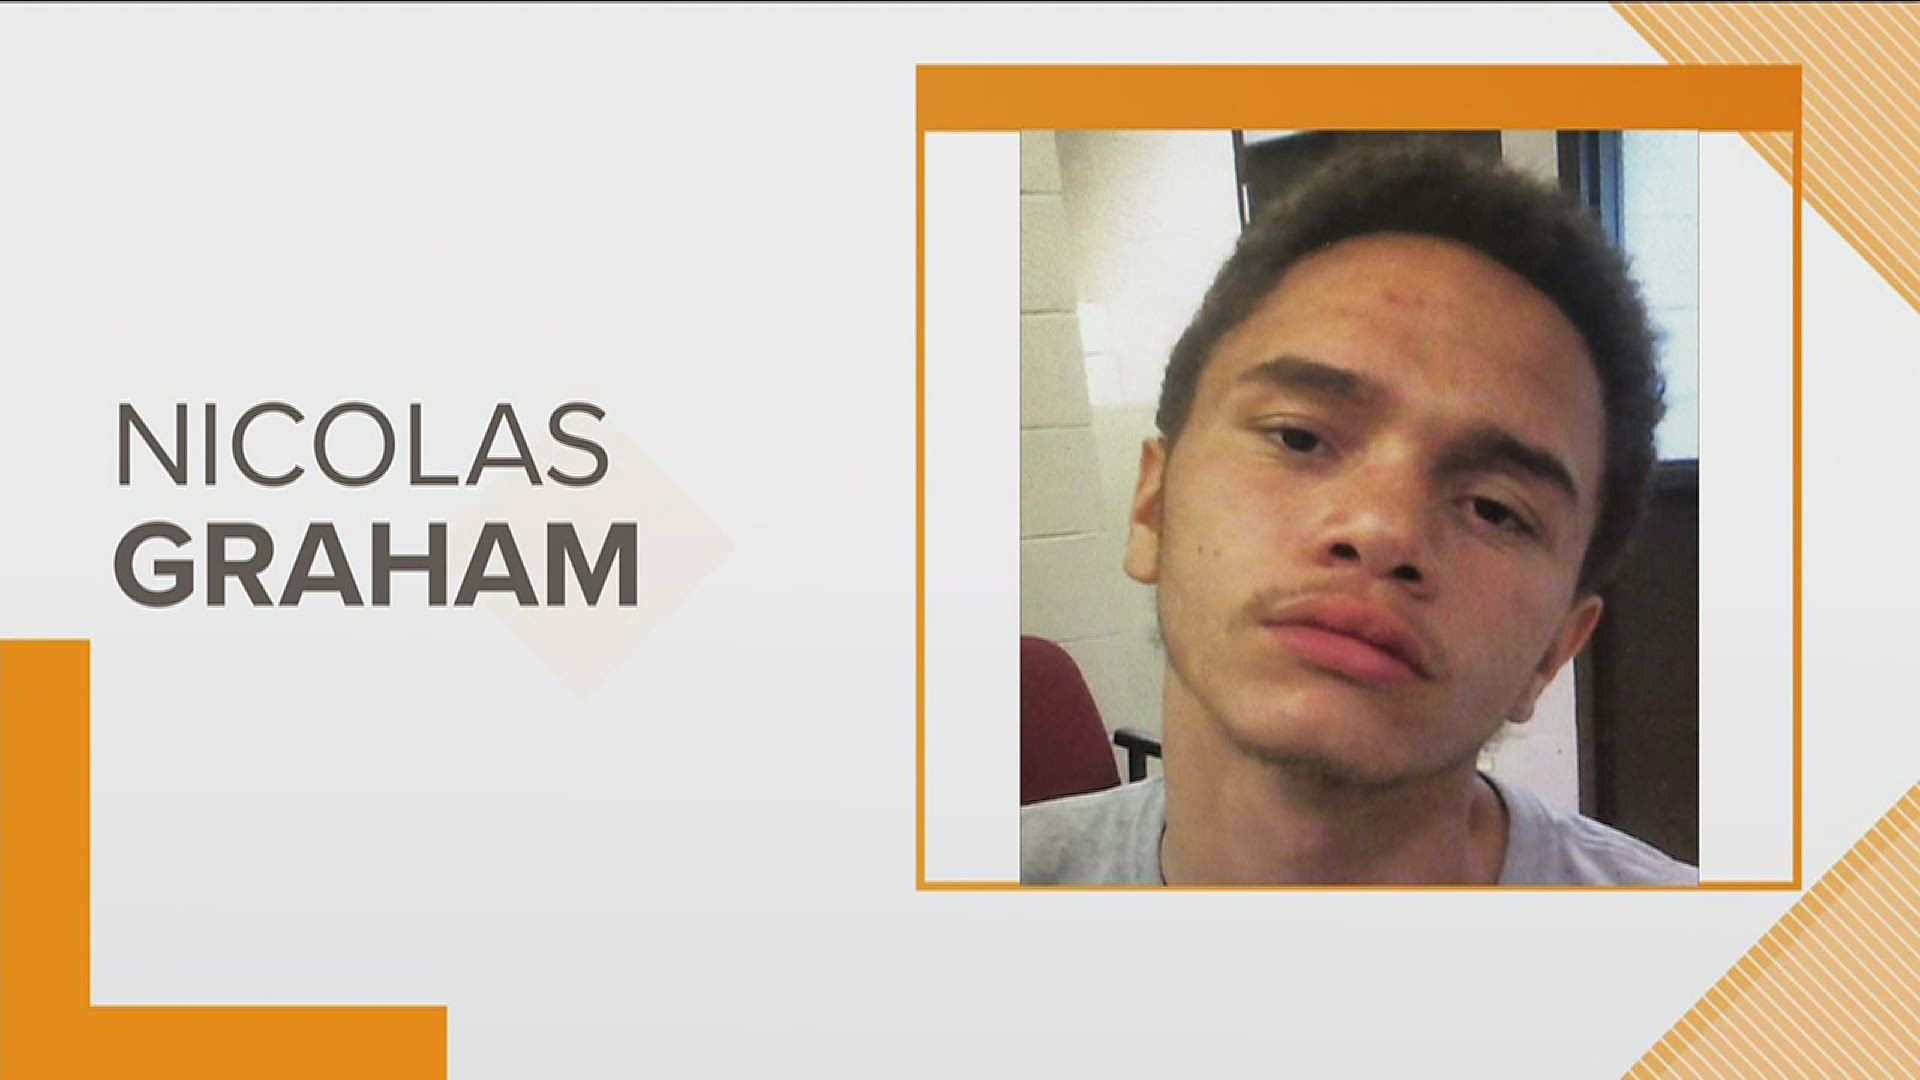 Yell County deputies and Dardanelle police are looking for 16-year-old Nicolas Graham.